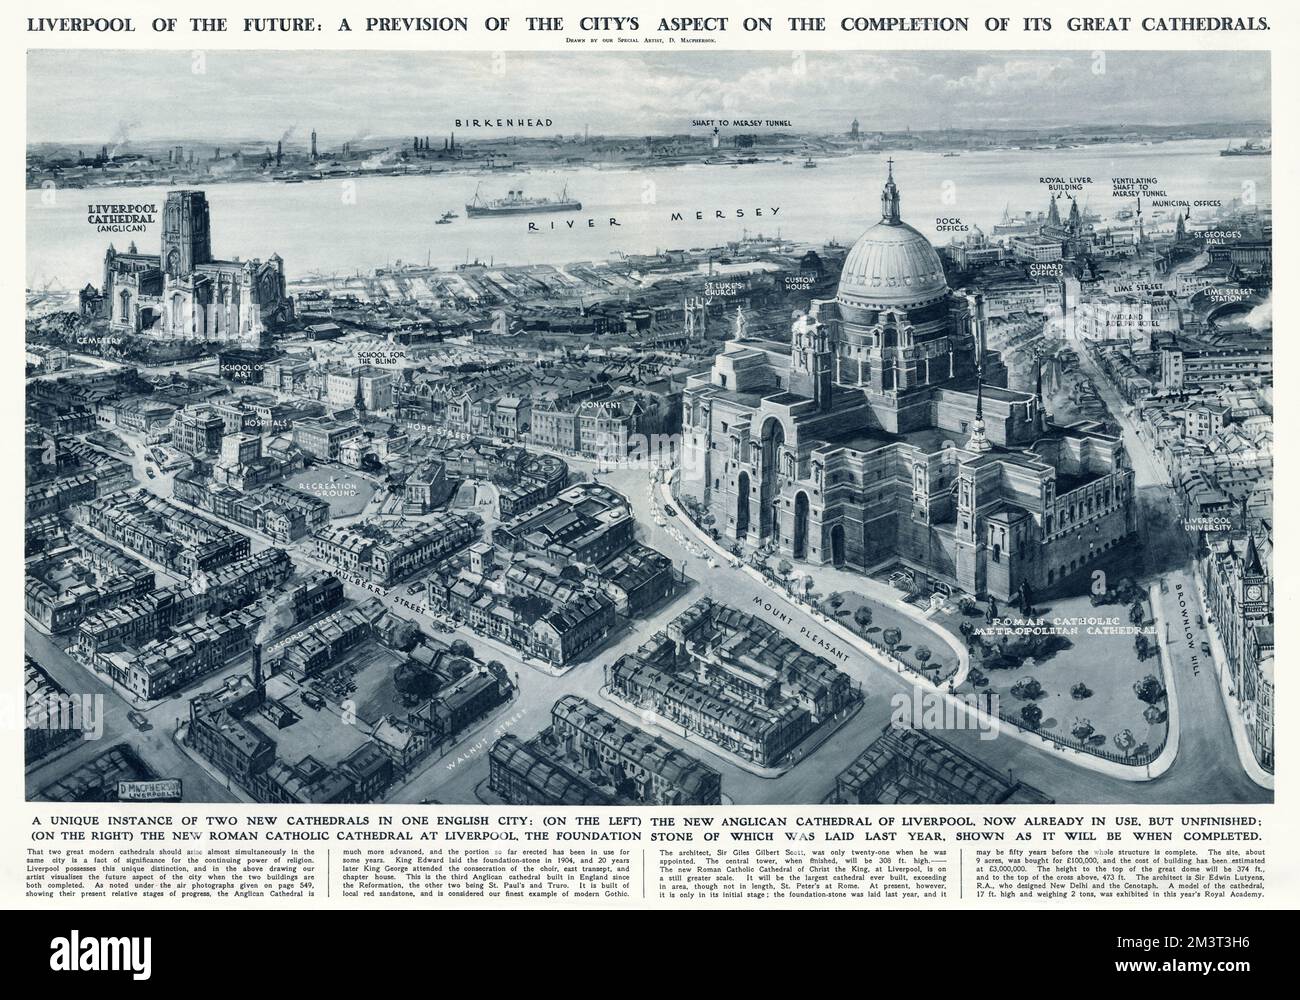 Liverpool of the future - a prevision of the city's aspect on the completion of its great cathedrals - the Anglican Cathedral (left) and the Roman Catholic Metropolitan Cathedral (right). Stock Photo